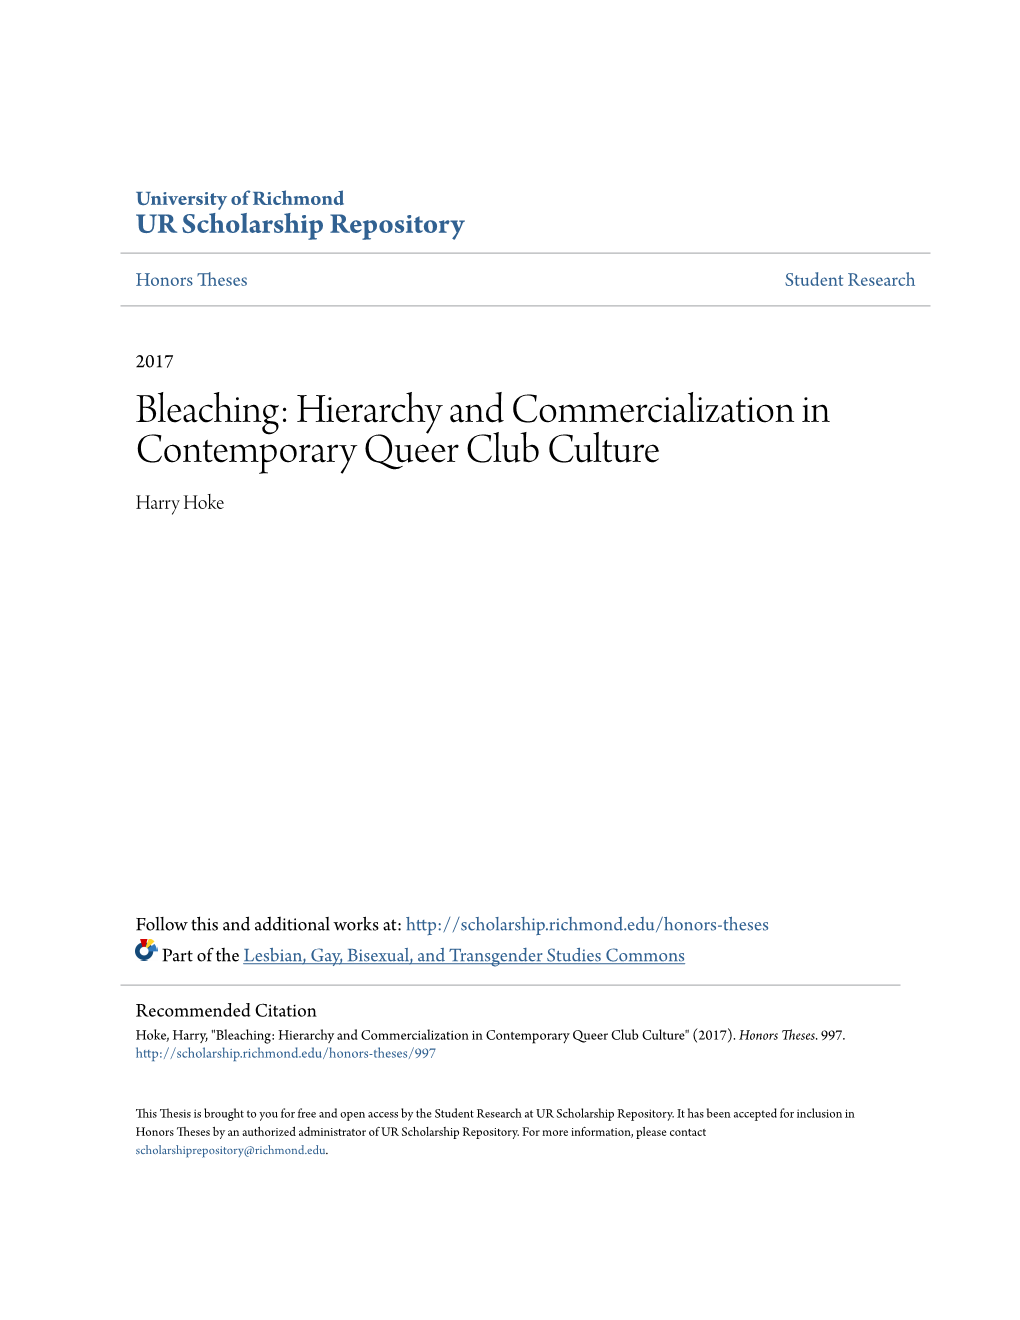 Hierarchy and Commercialization in Contemporary Queer Club Culture Harry Hoke